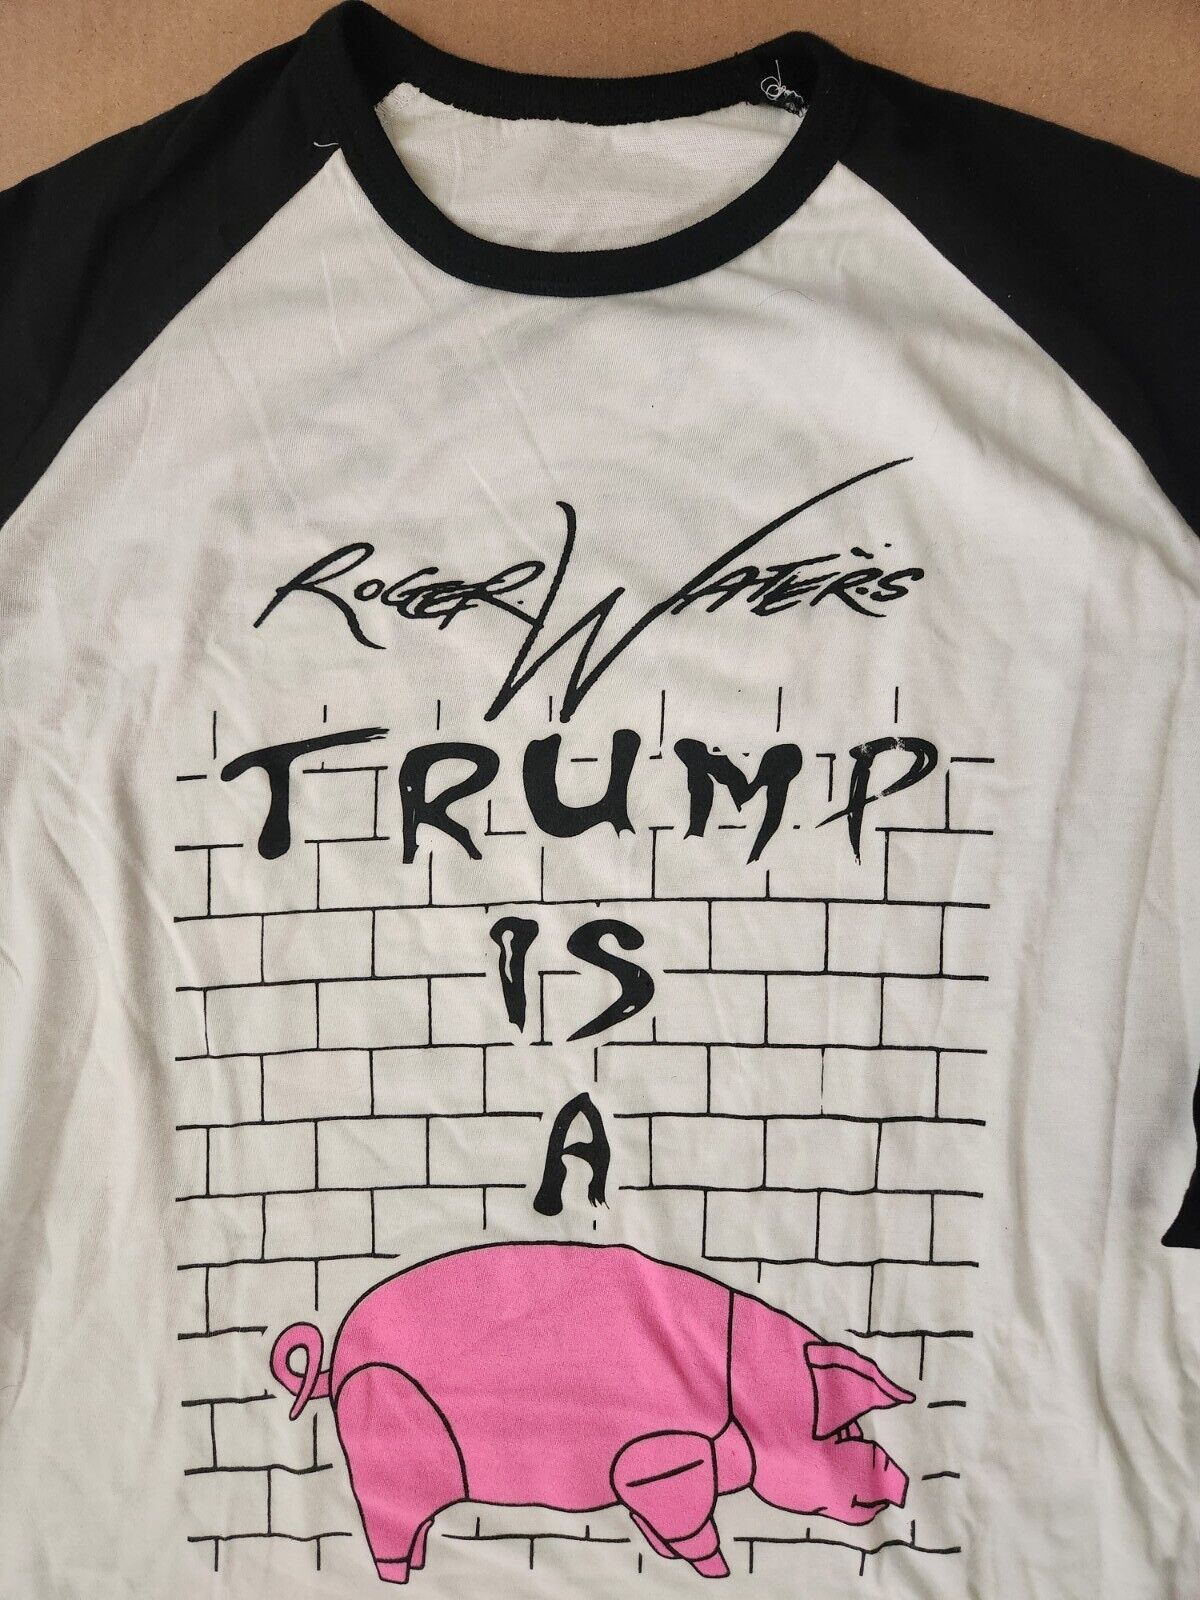 DONALD 666 TRUMP IS A PIG * ROGER WATERS 2017 SHIRT US AND THEM TOUR PINK FLOYD